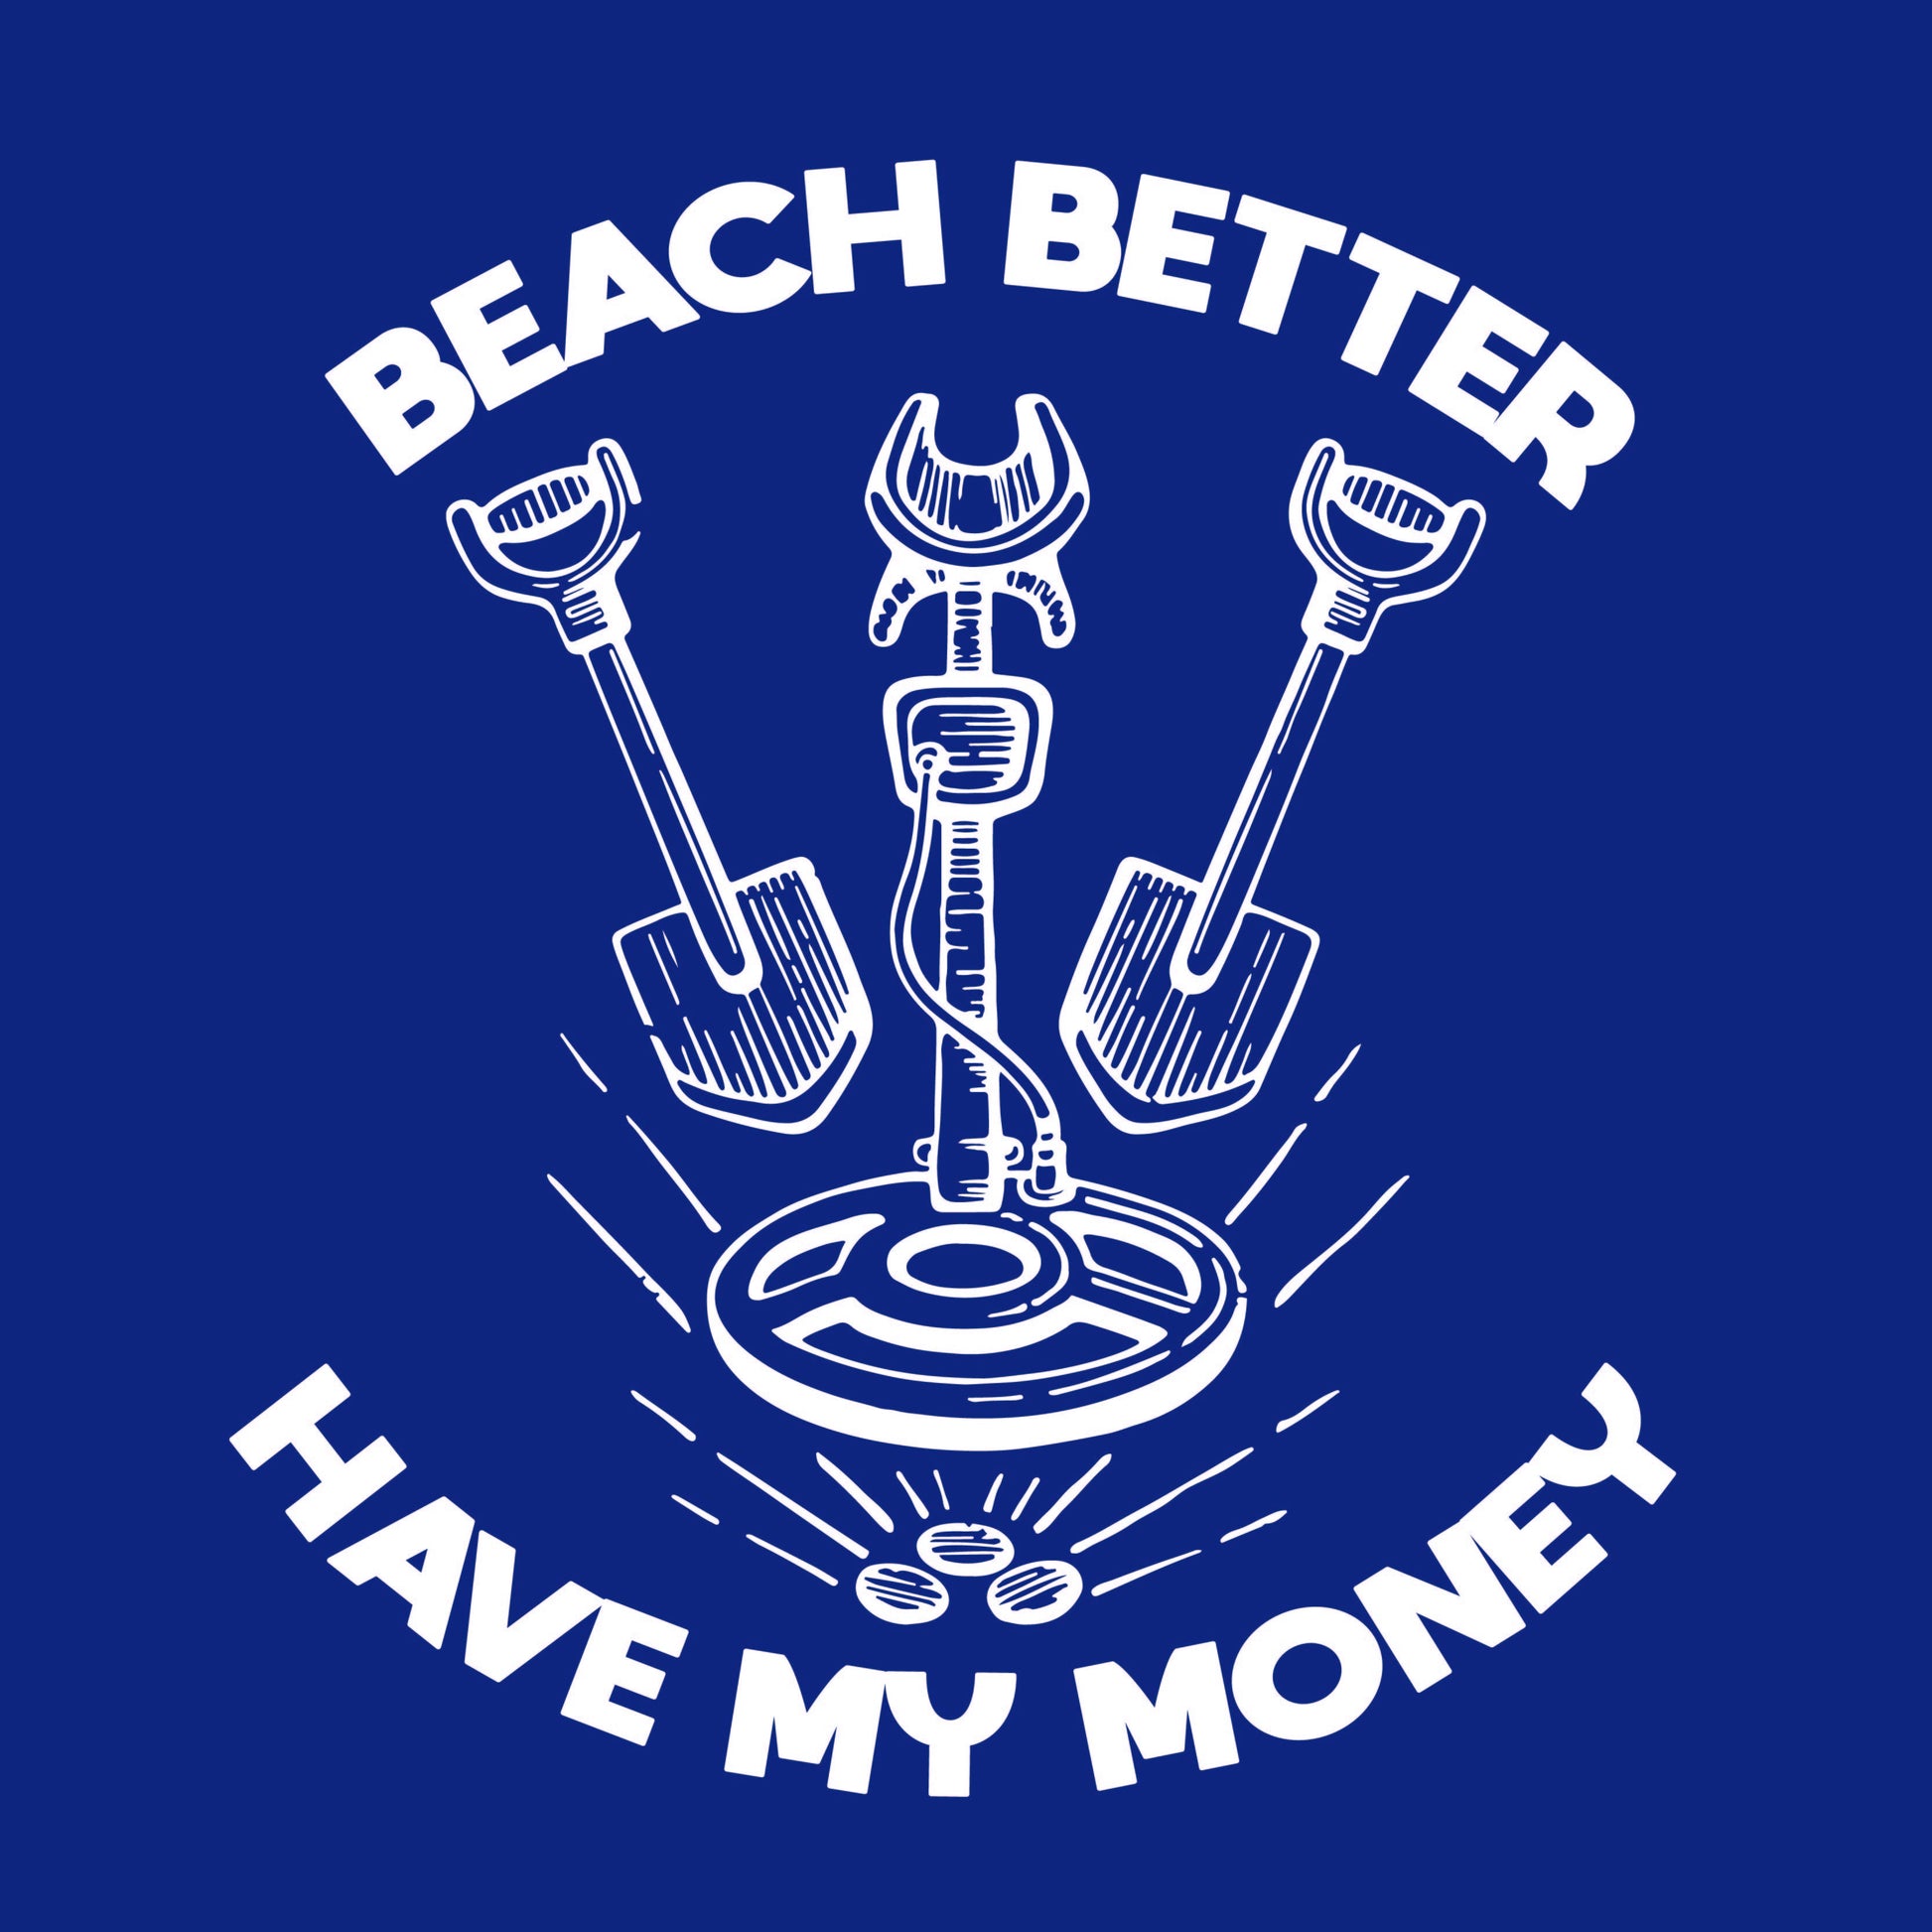 Beach Better, Have my Money - Funny Graphic T Shirts